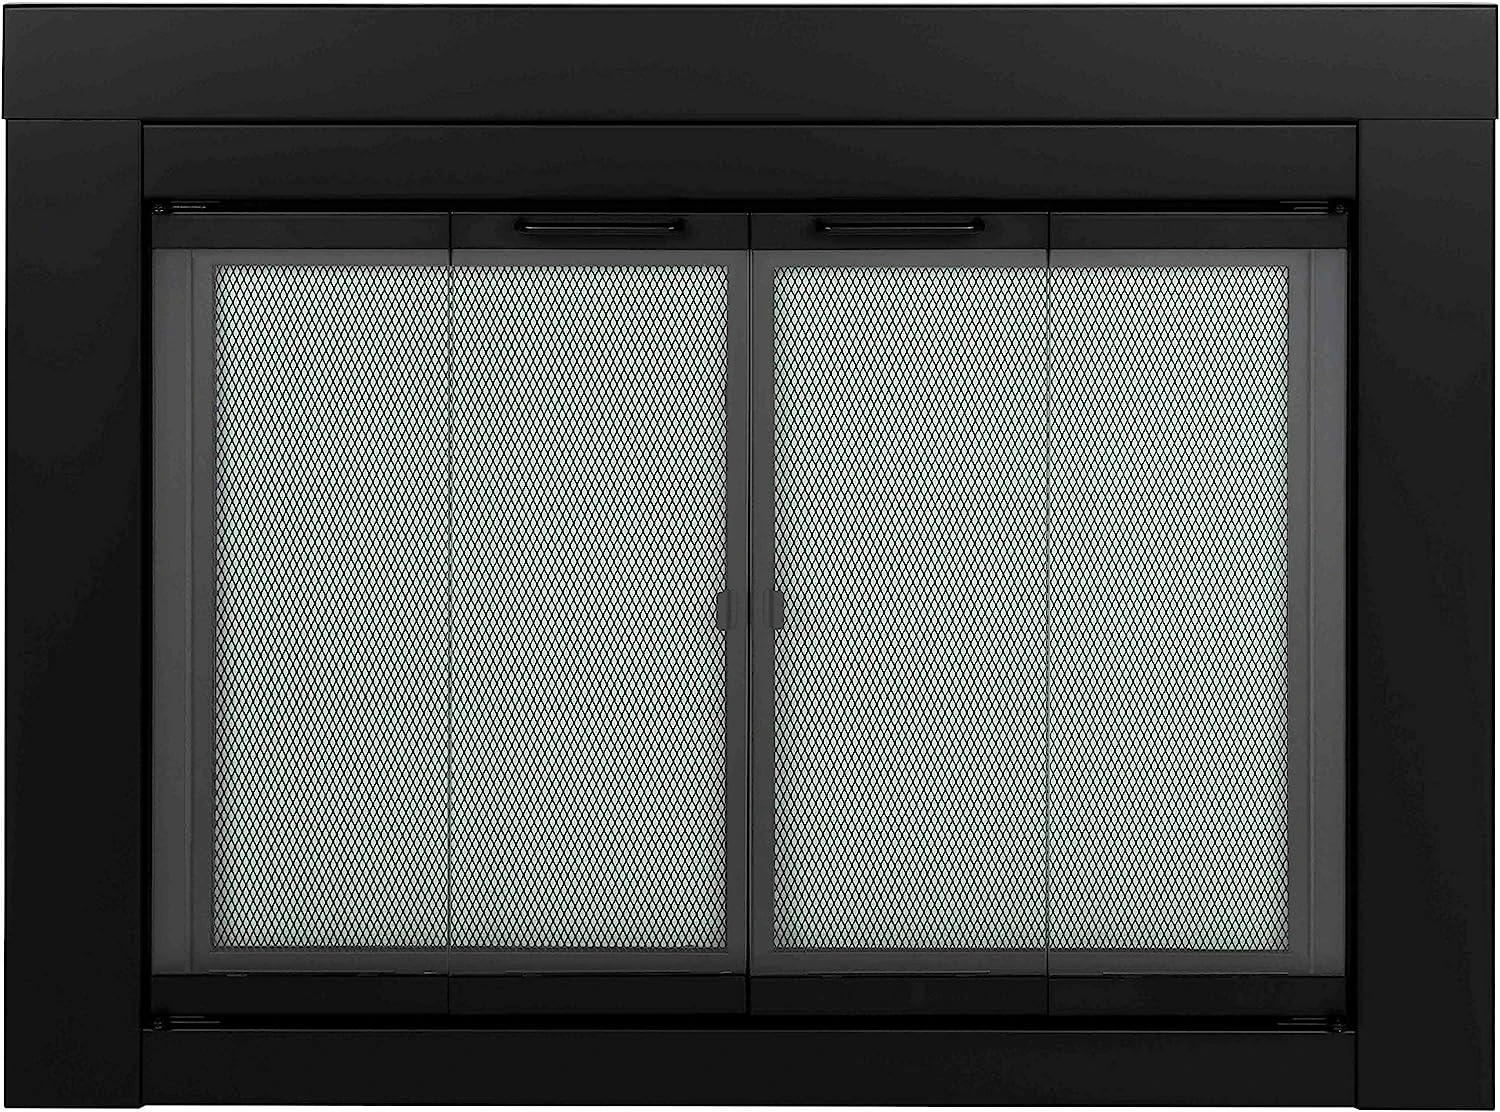 

Hearth AT-1002 Ascot Fireplace Glass Door, Black, Large Electric fireplace for living room